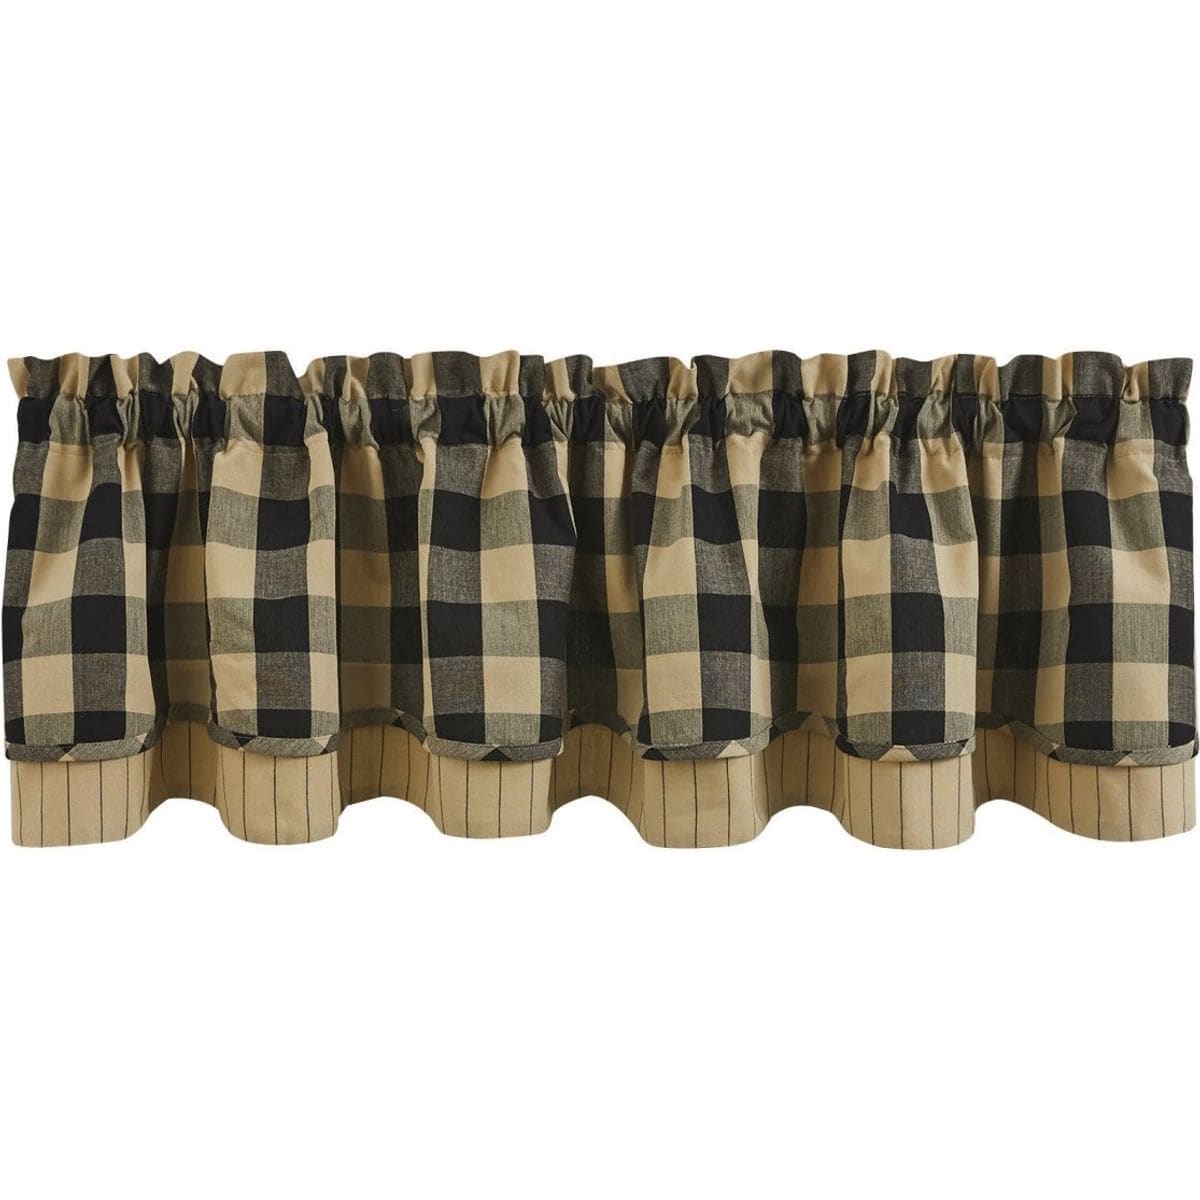 Wicklow Check in Black Layered Valance Lined-Park Designs-The Village Merchant